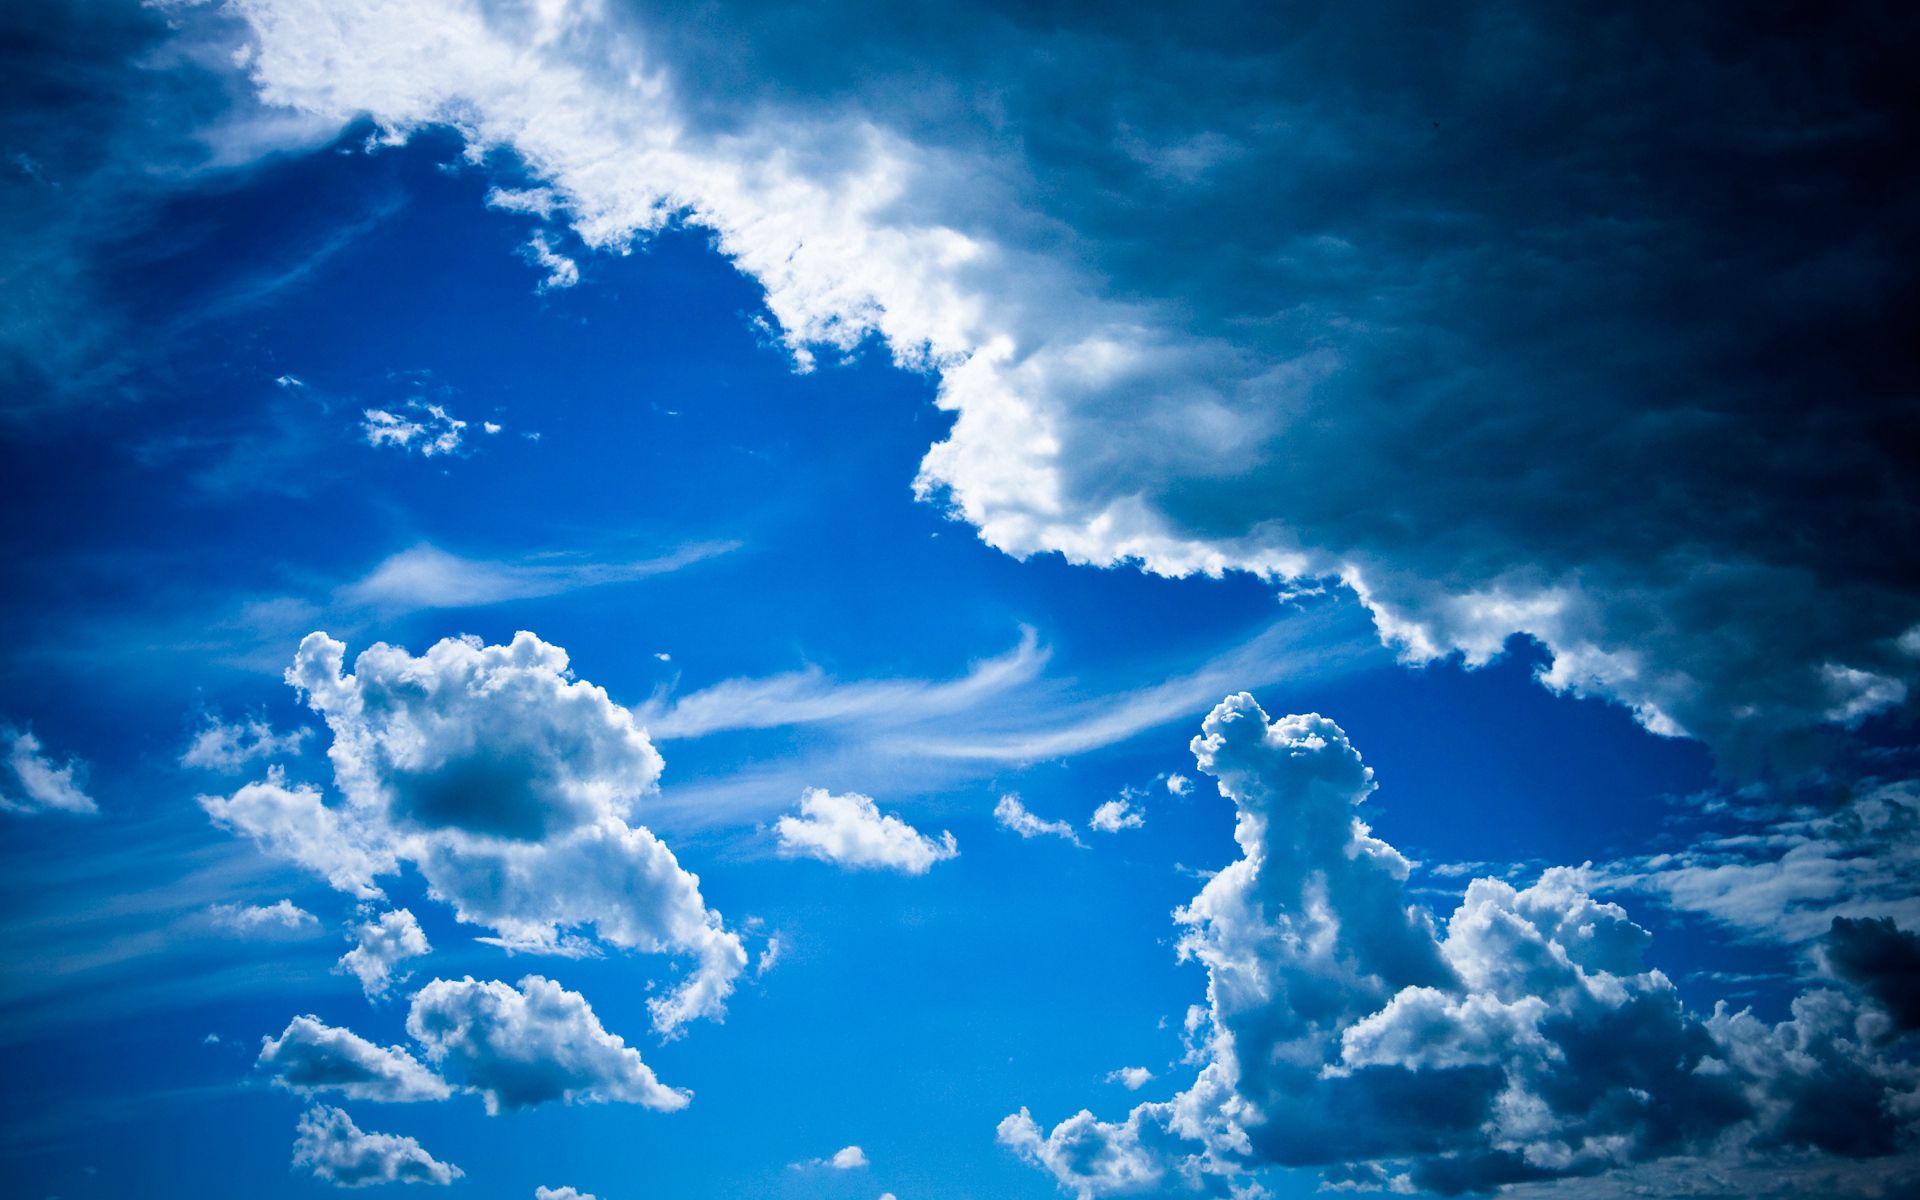 patterns, nature, sky, clouds, blue, volume, ease, air masses